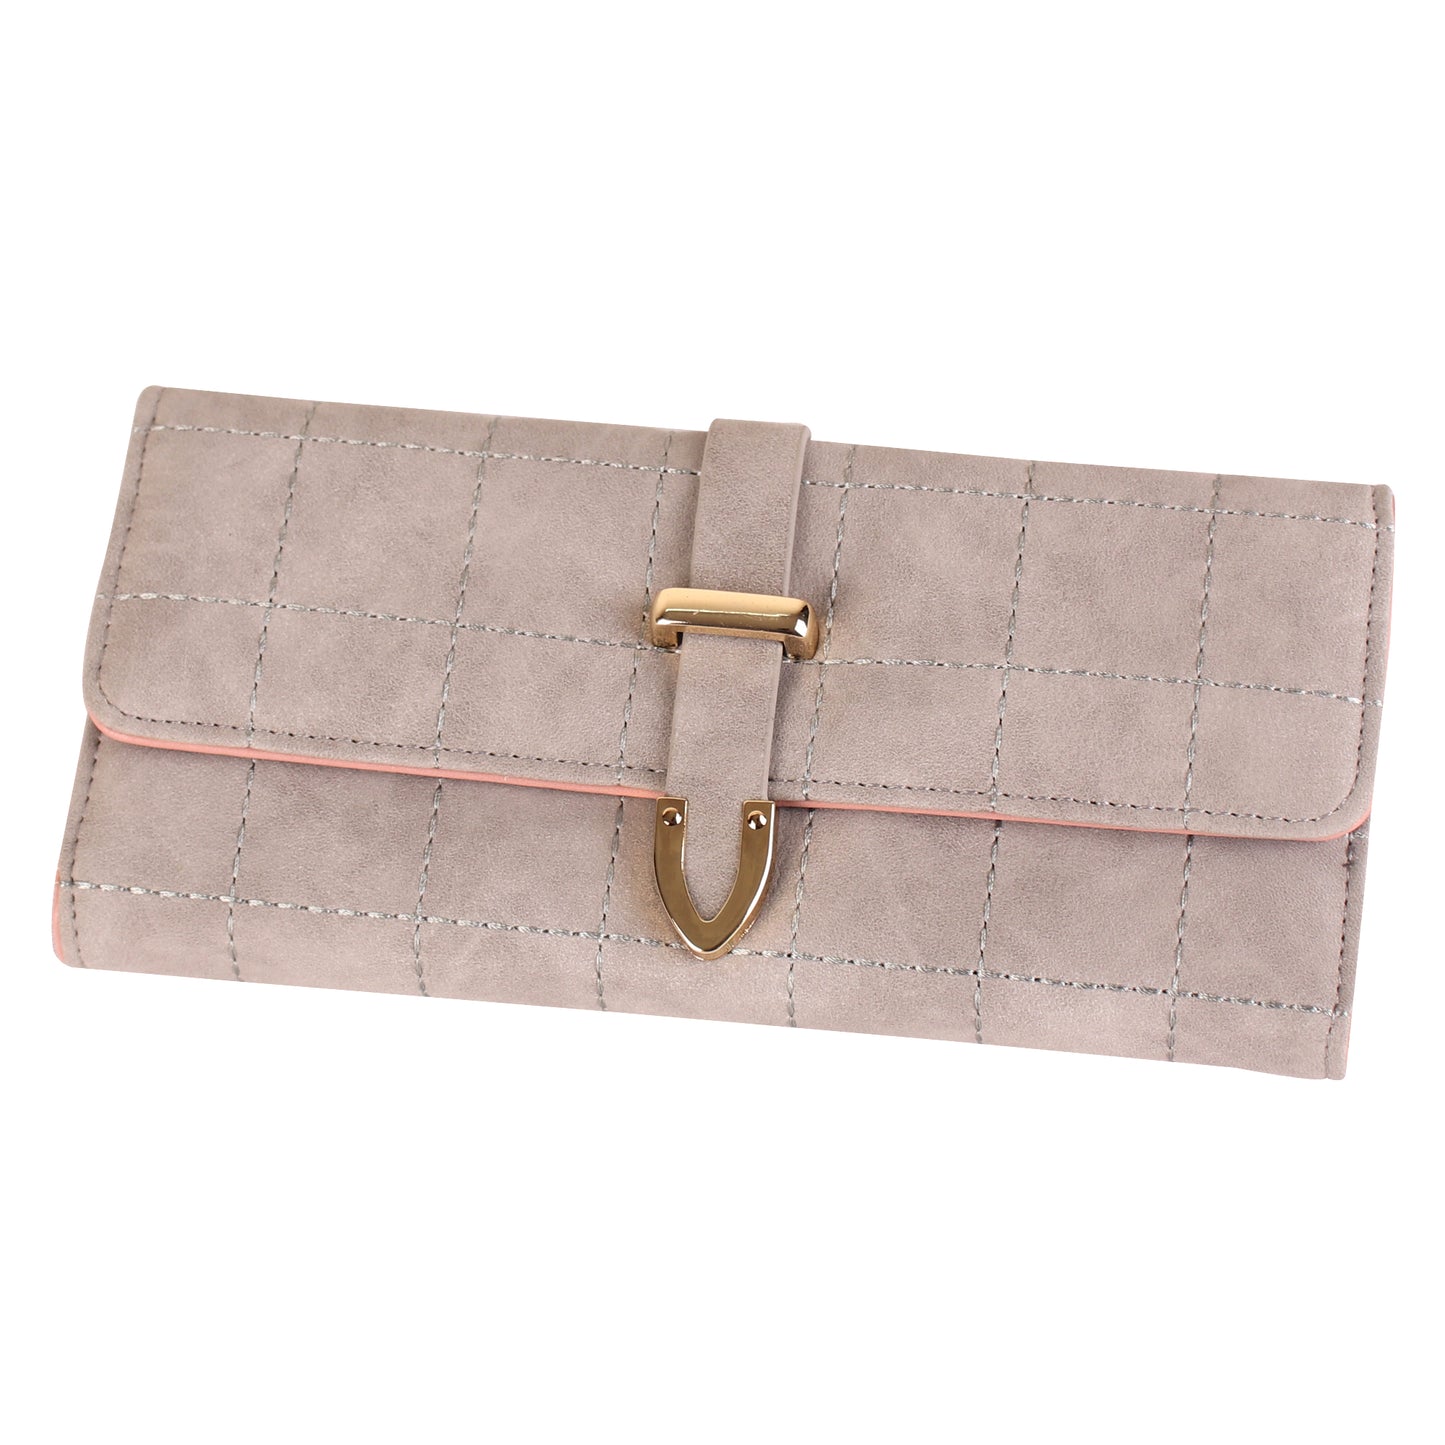 The Boxy Clamped Wallet in Light Grey